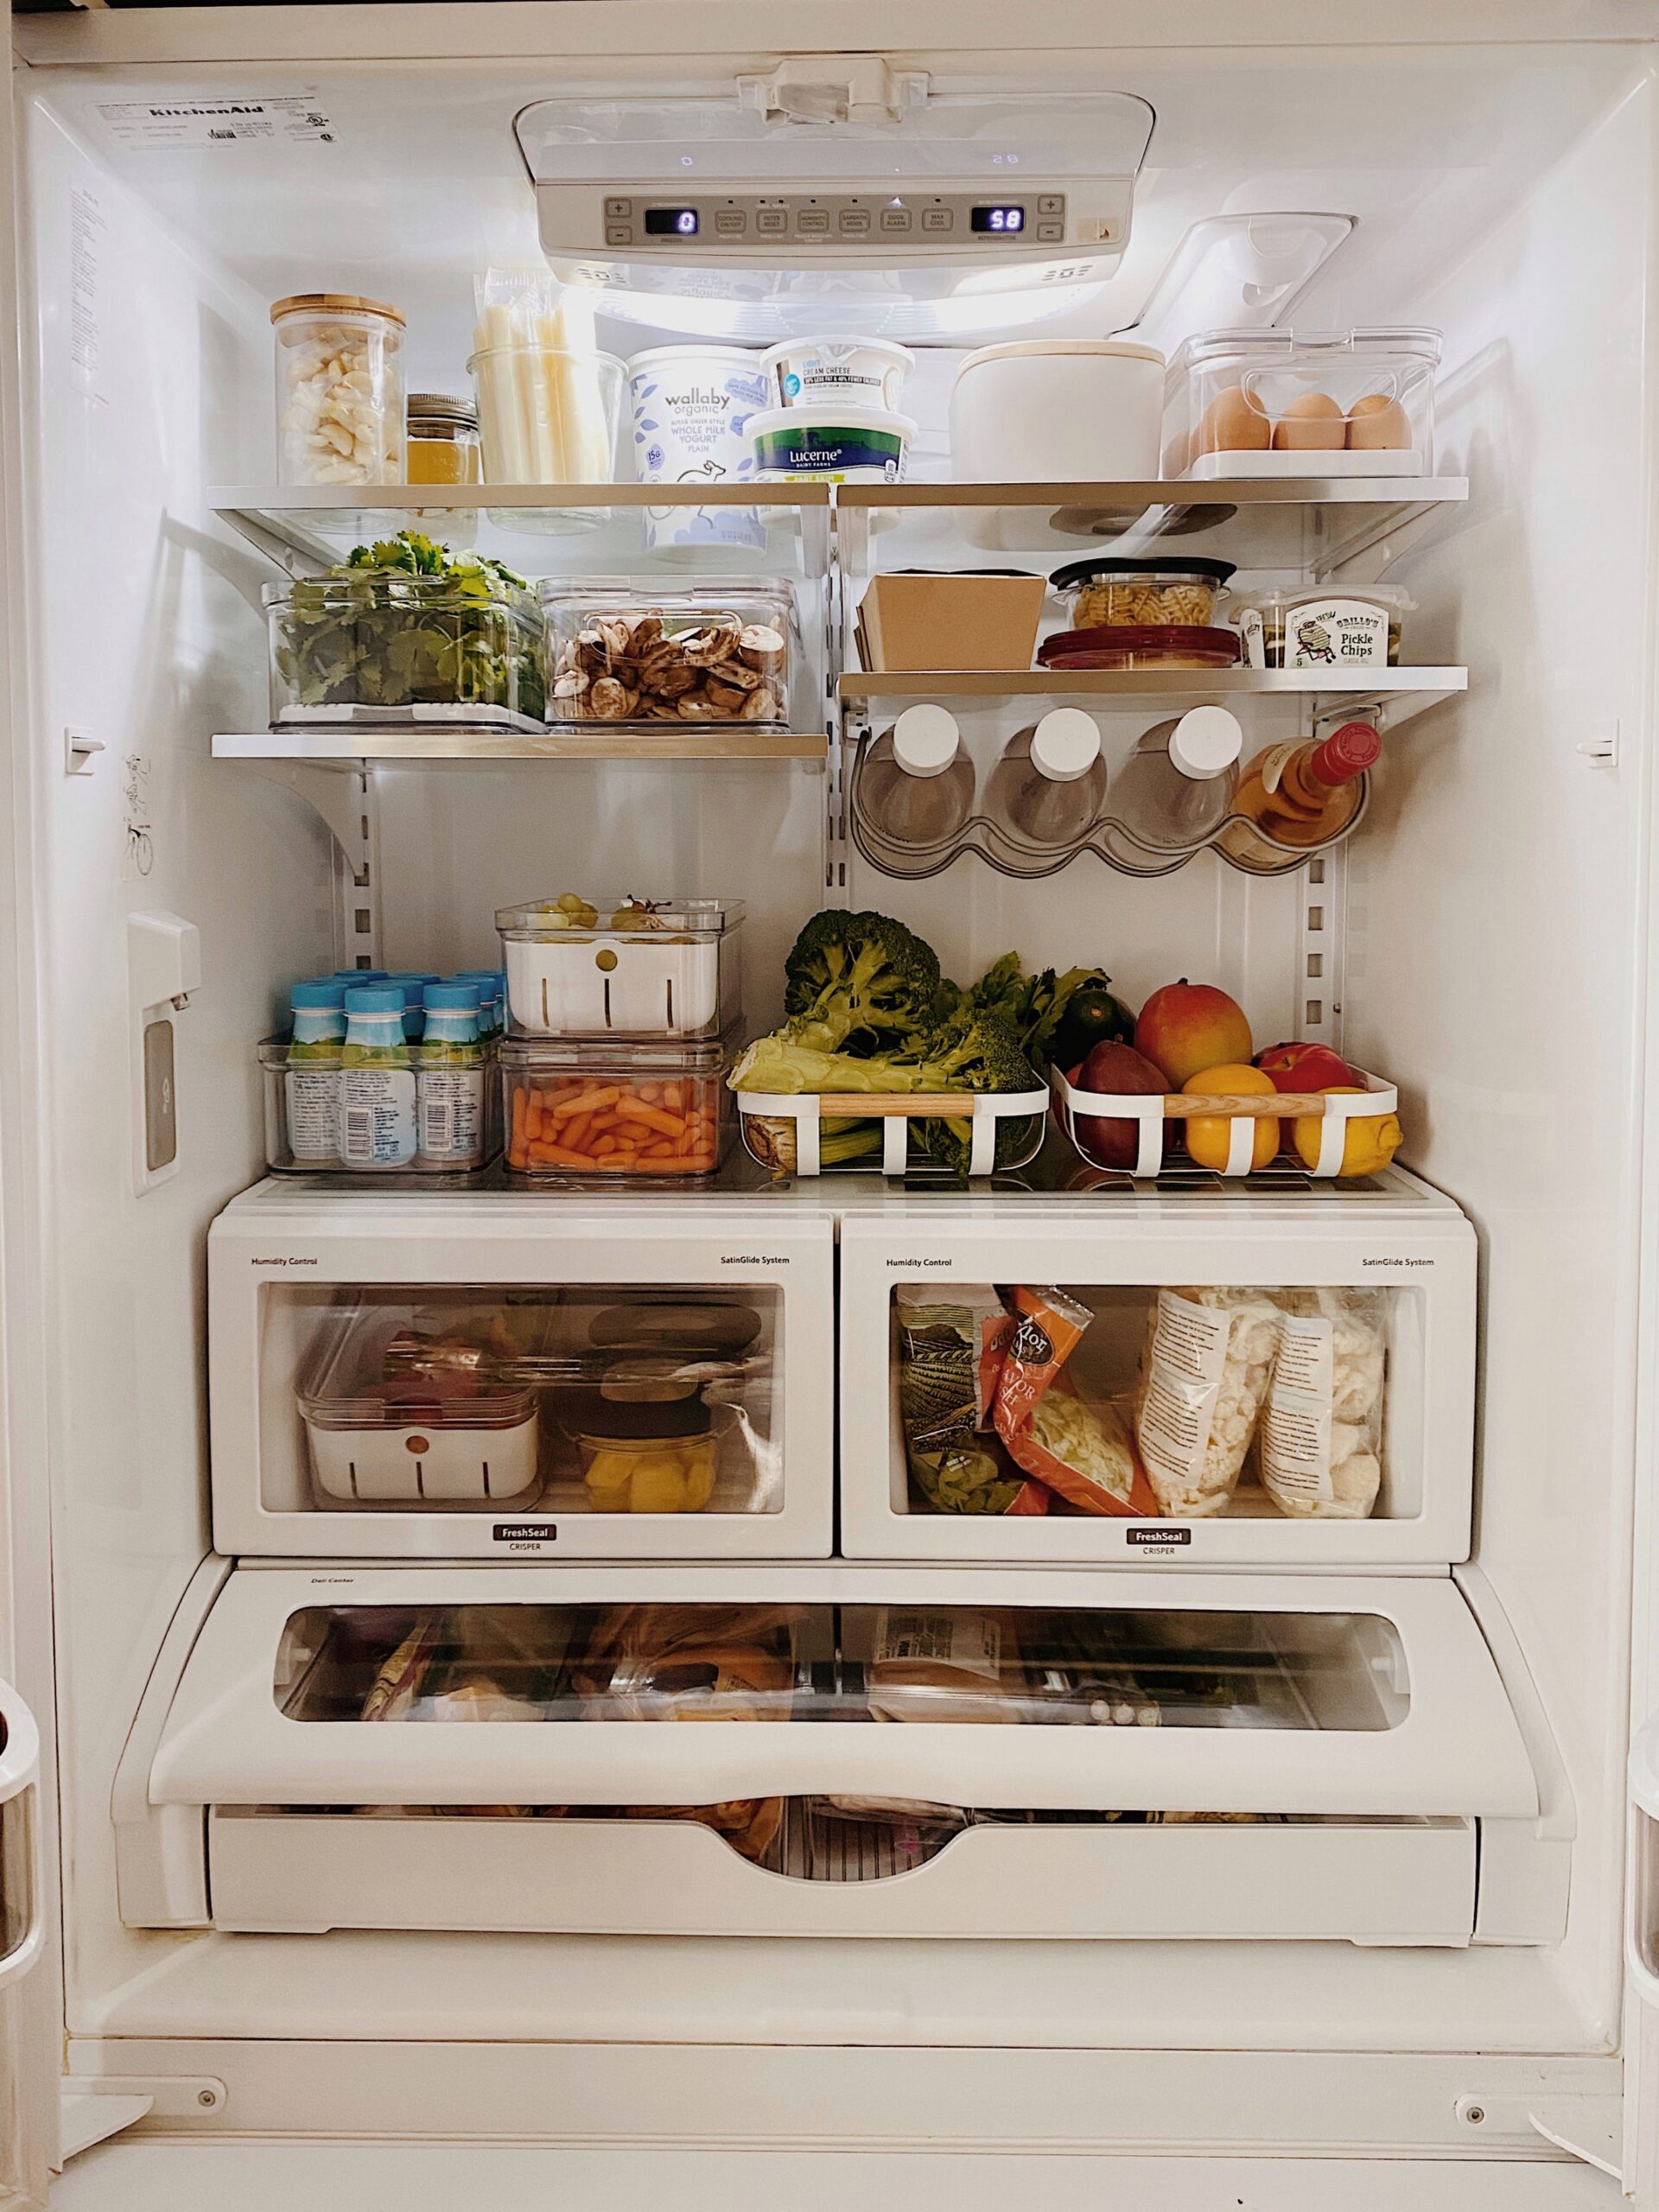 How to Organize Your Fridge, According to Pro Chefs